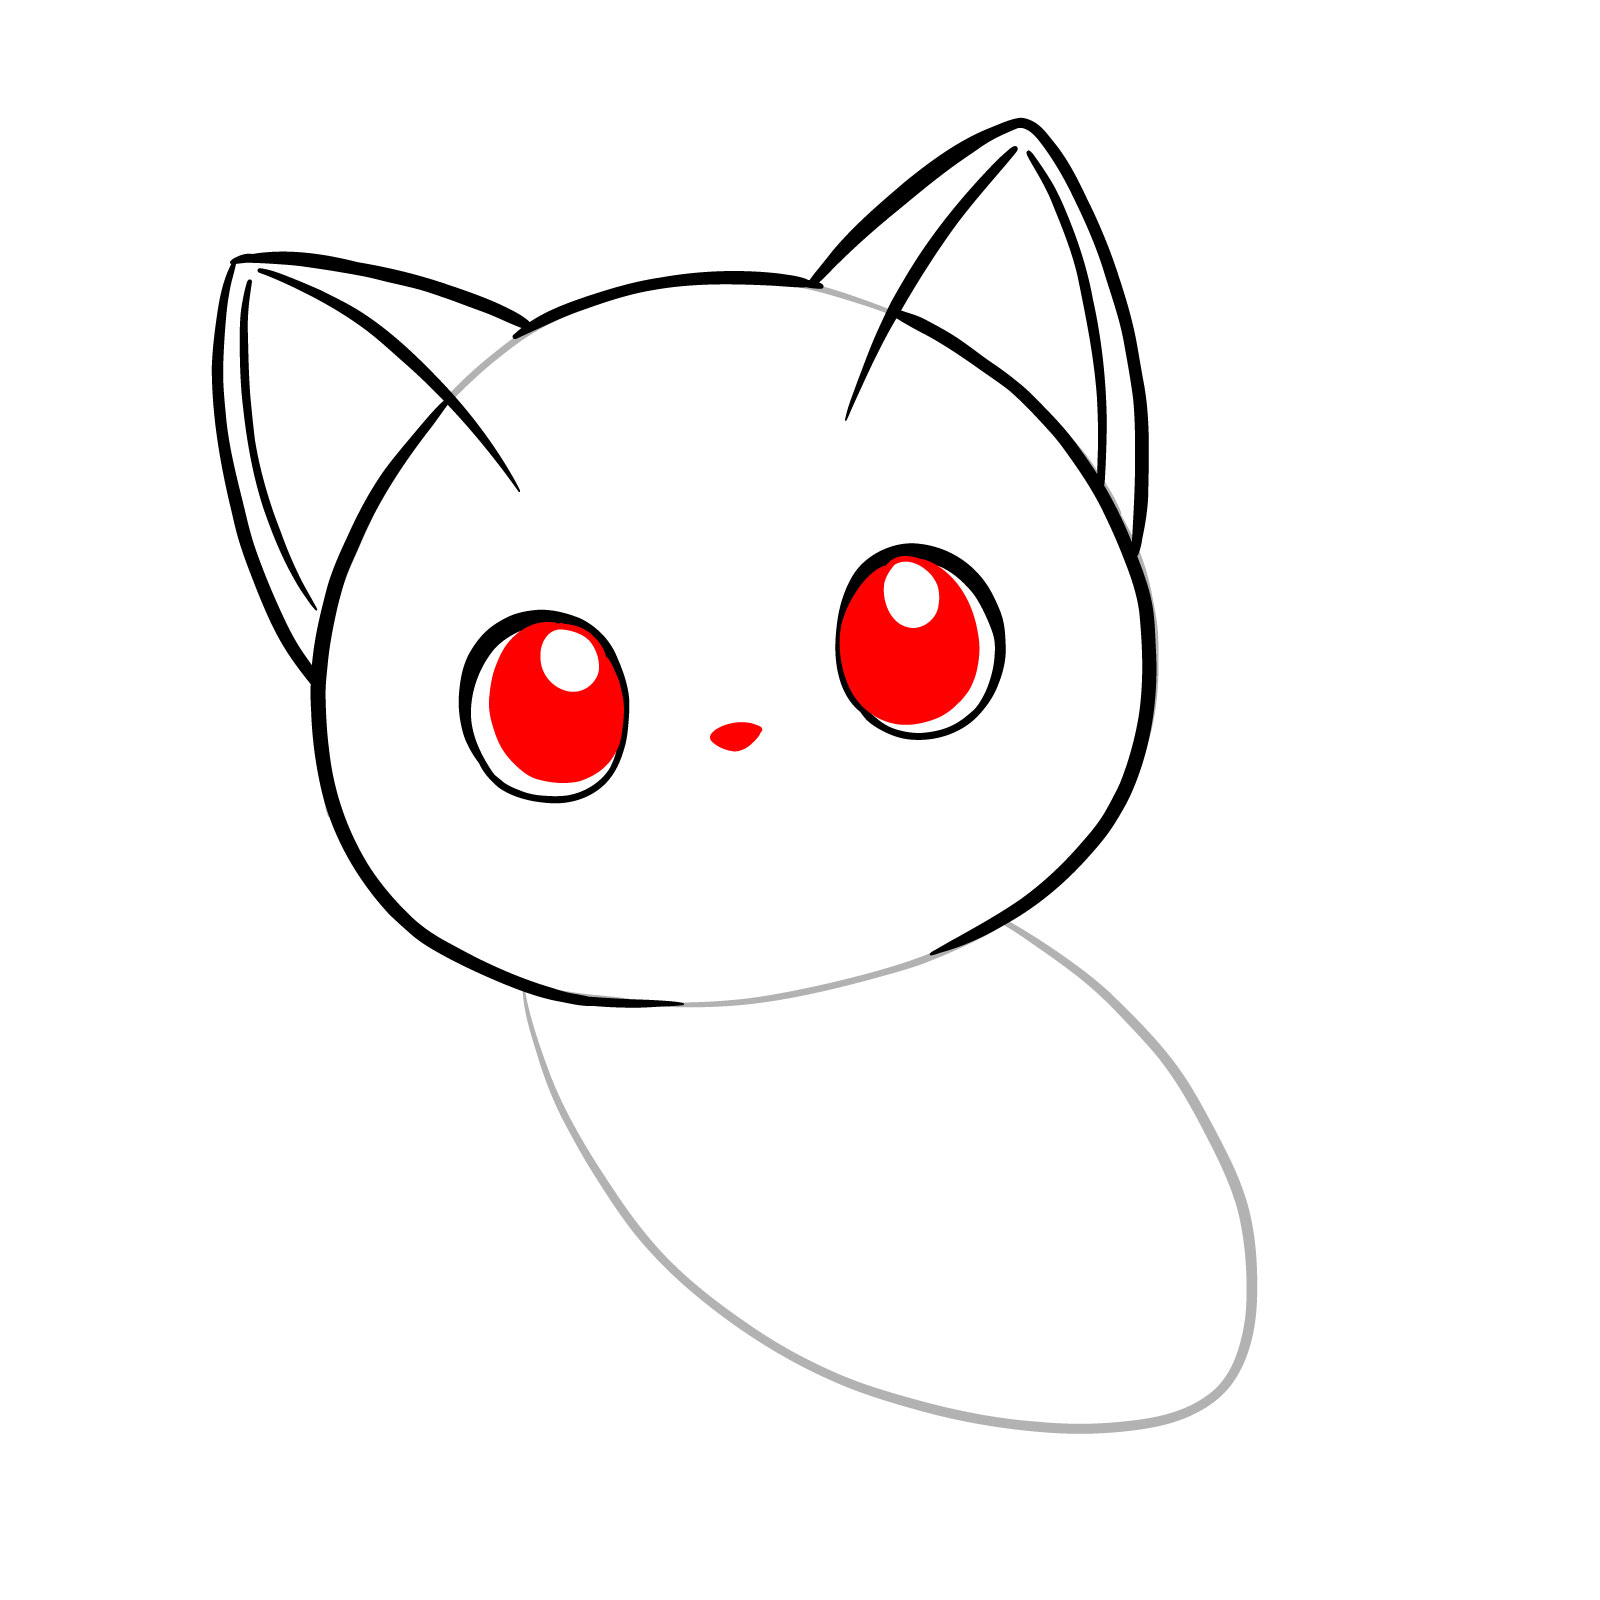 How to draw an anime cat - step 05